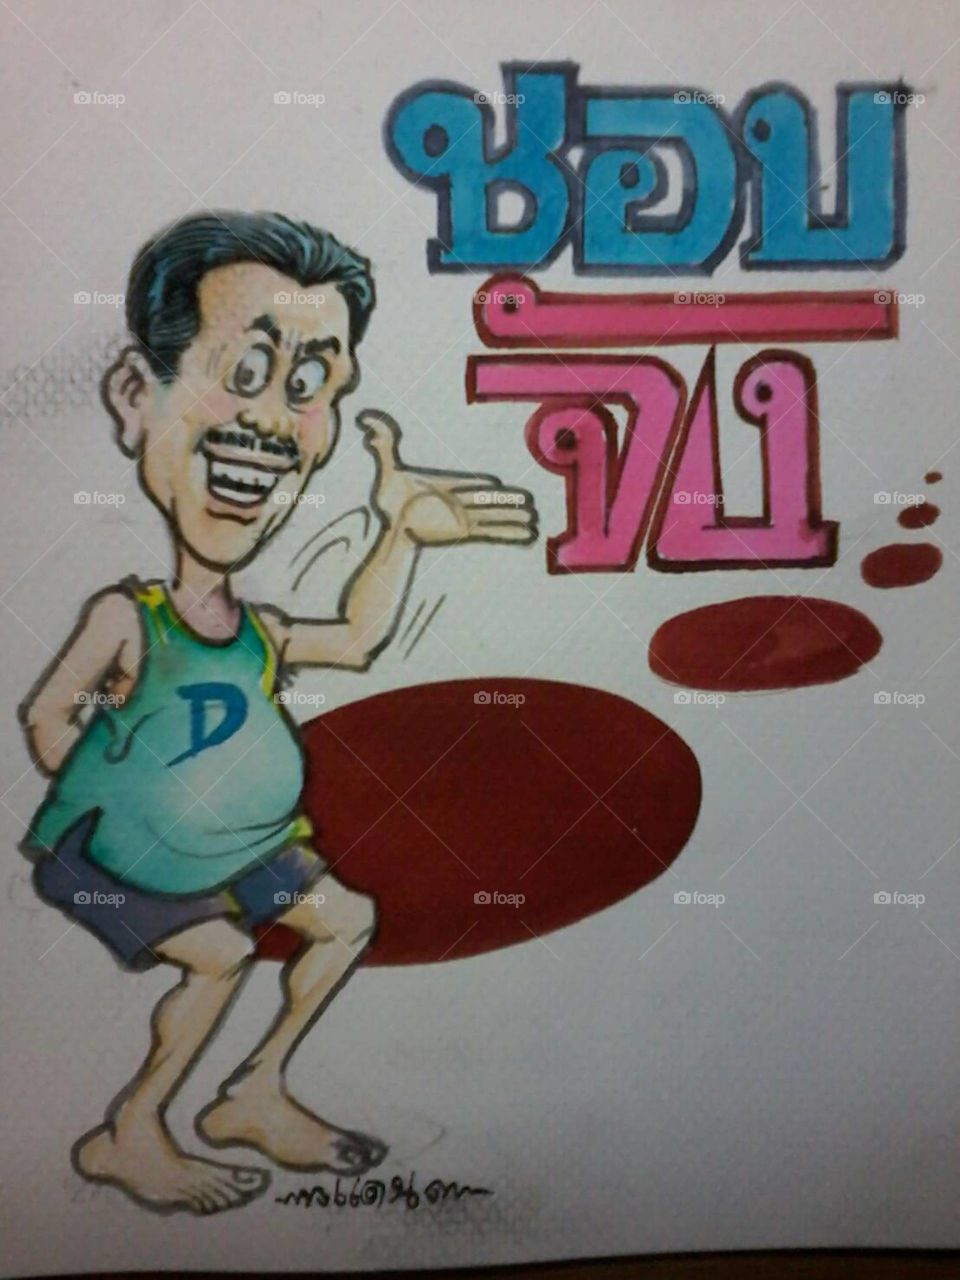 Mr. Dan Sudsakorn is 1 of my favourite artists. I like his art work and this one says " ชอบ จัง= I like it so much" .:-)